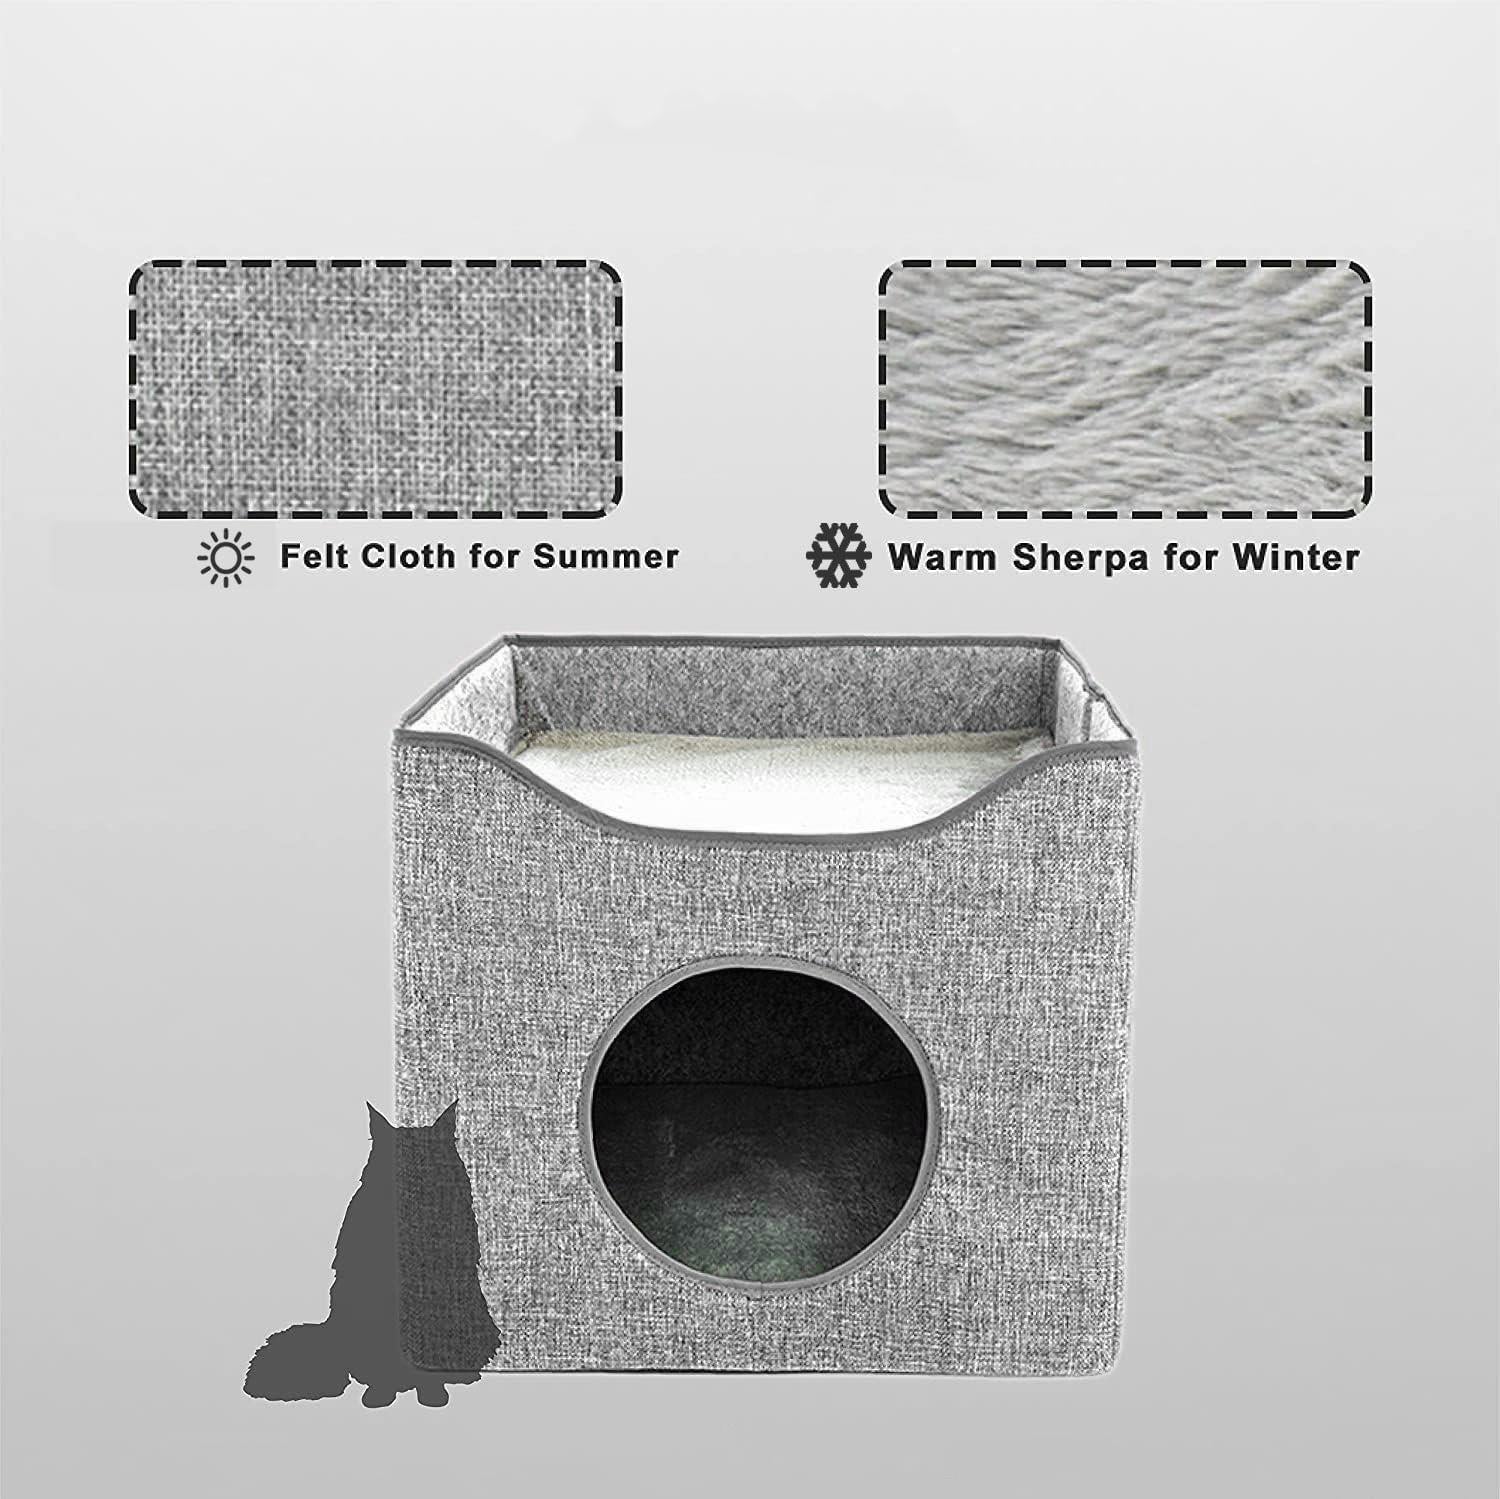 Foldable Cosy Cat Houses